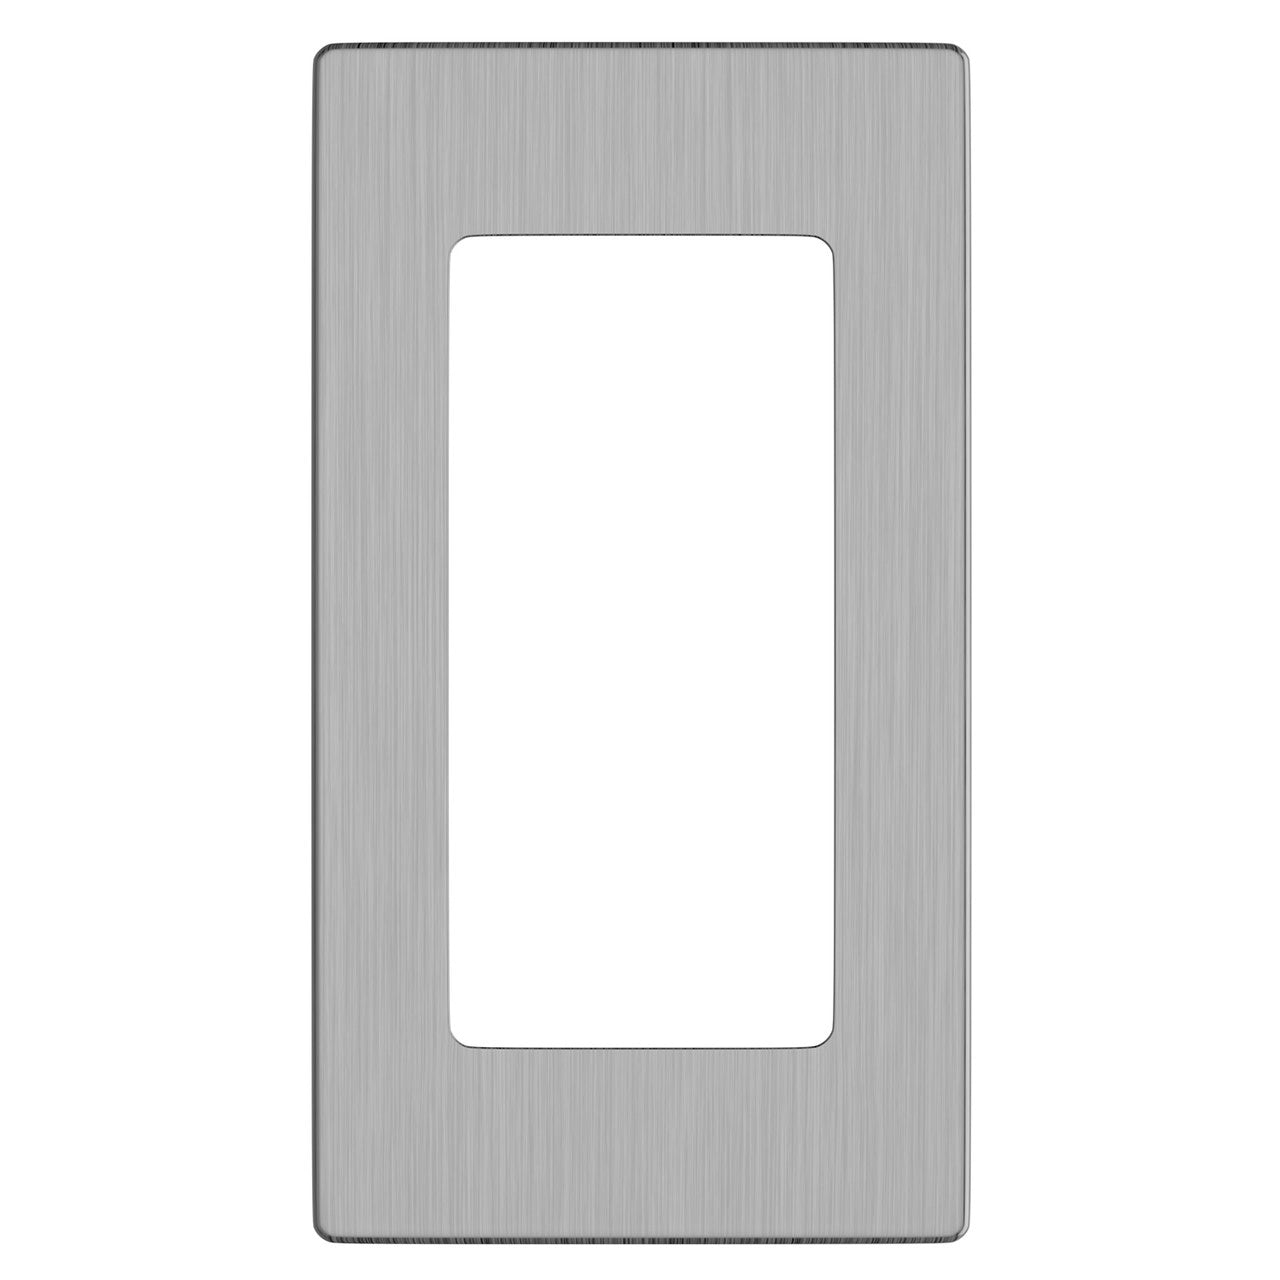 ProofVision PV11-BS-FR Brushed Steel Toothbrush Charger Plate